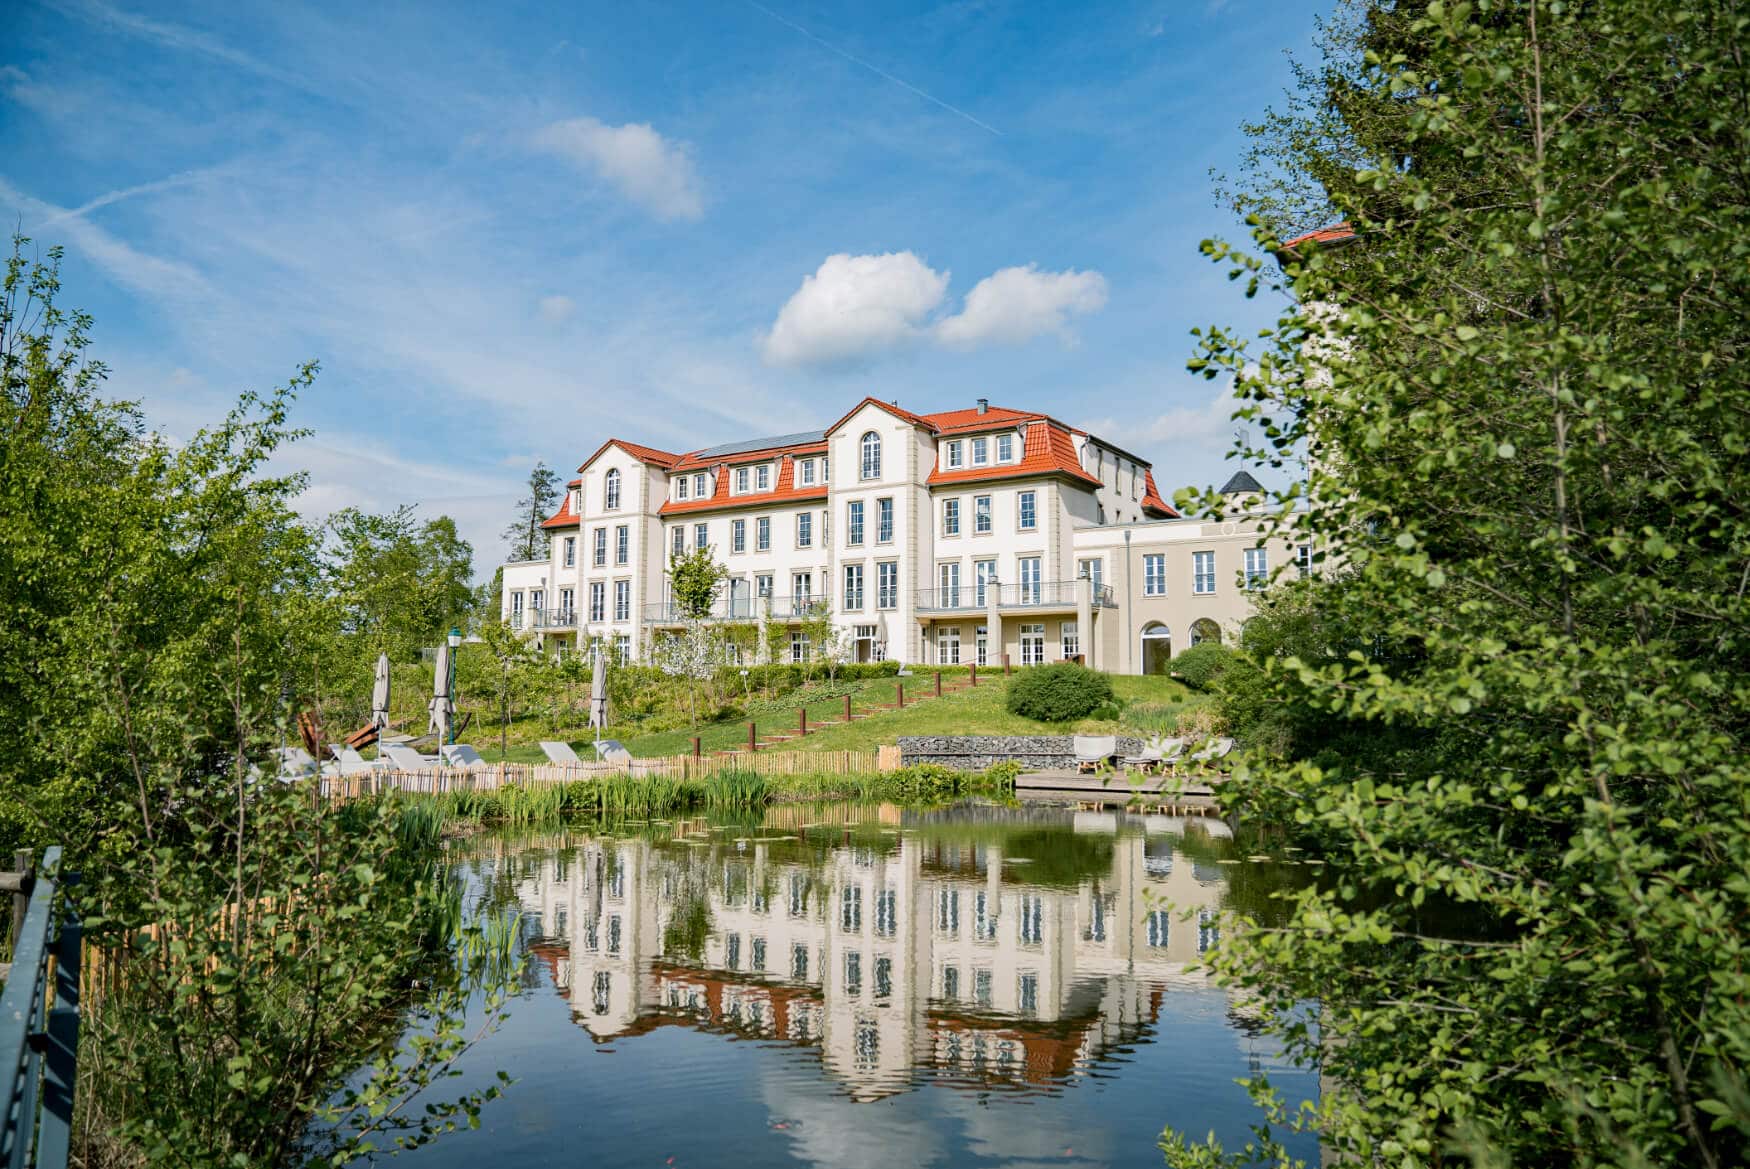 The Schindelbruch nature resort, a hotel in the german countryside